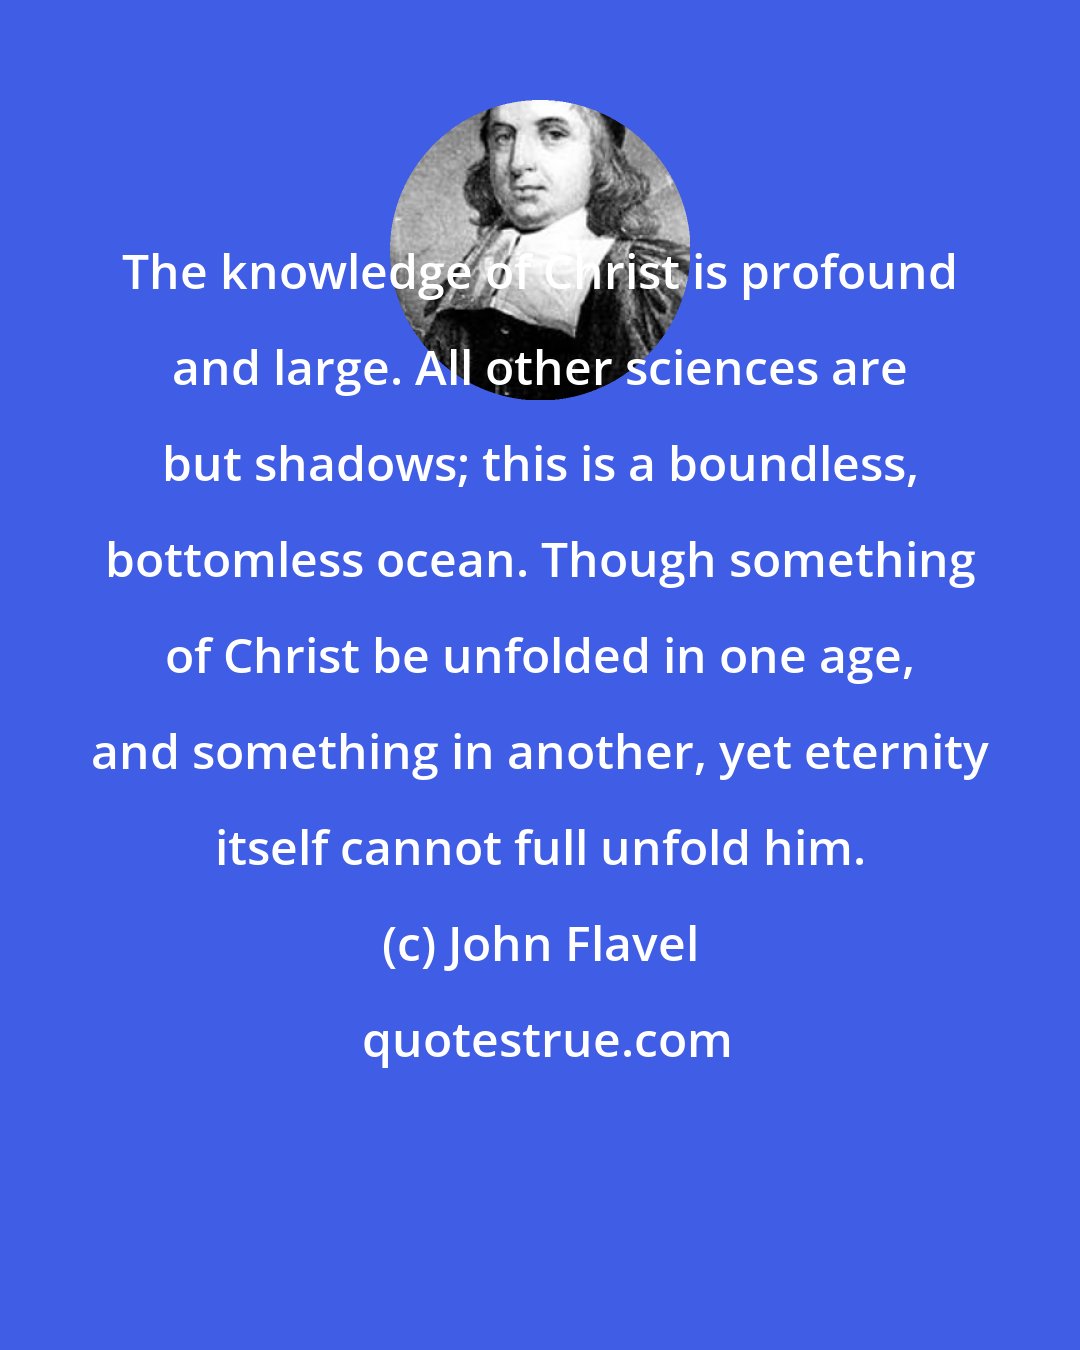 John Flavel: The knowledge of Christ is profound and large. All other sciences are but shadows; this is a boundless, bottomless ocean. Though something of Christ be unfolded in one age, and something in another, yet eternity itself cannot full unfold him.